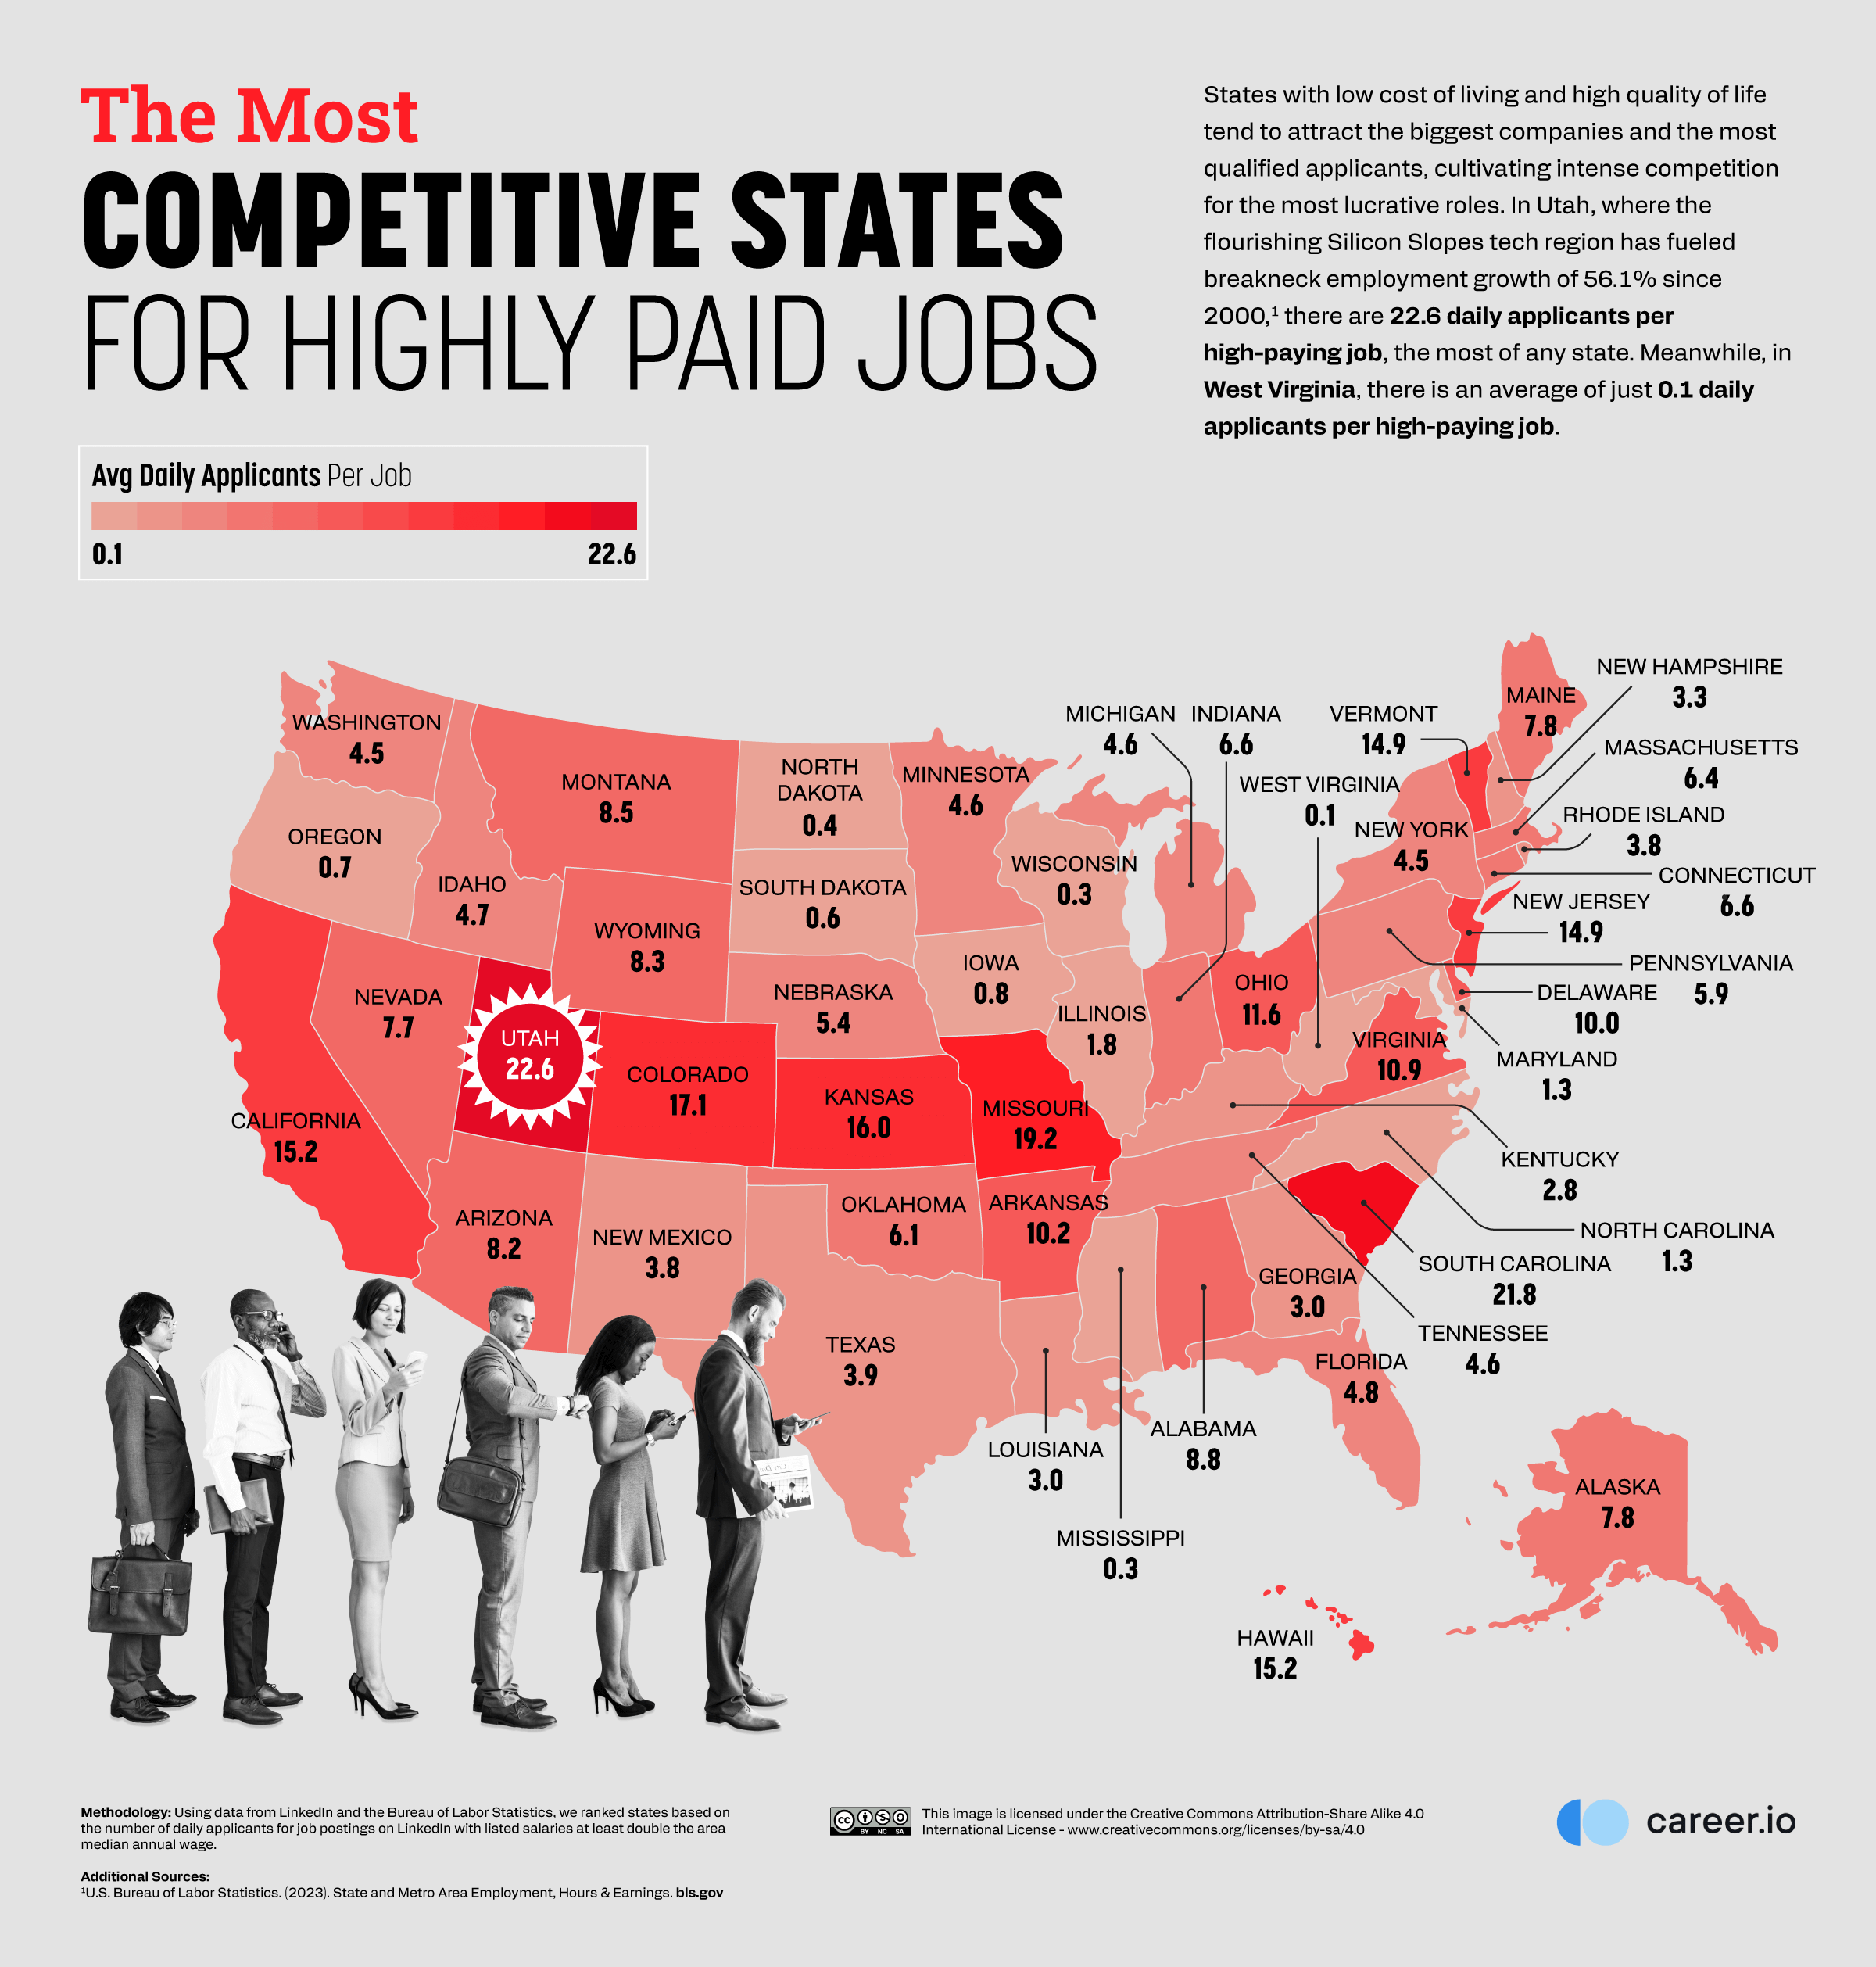 05_The-Most-Competitive-States-for-Highly-Paid-Jobs.png